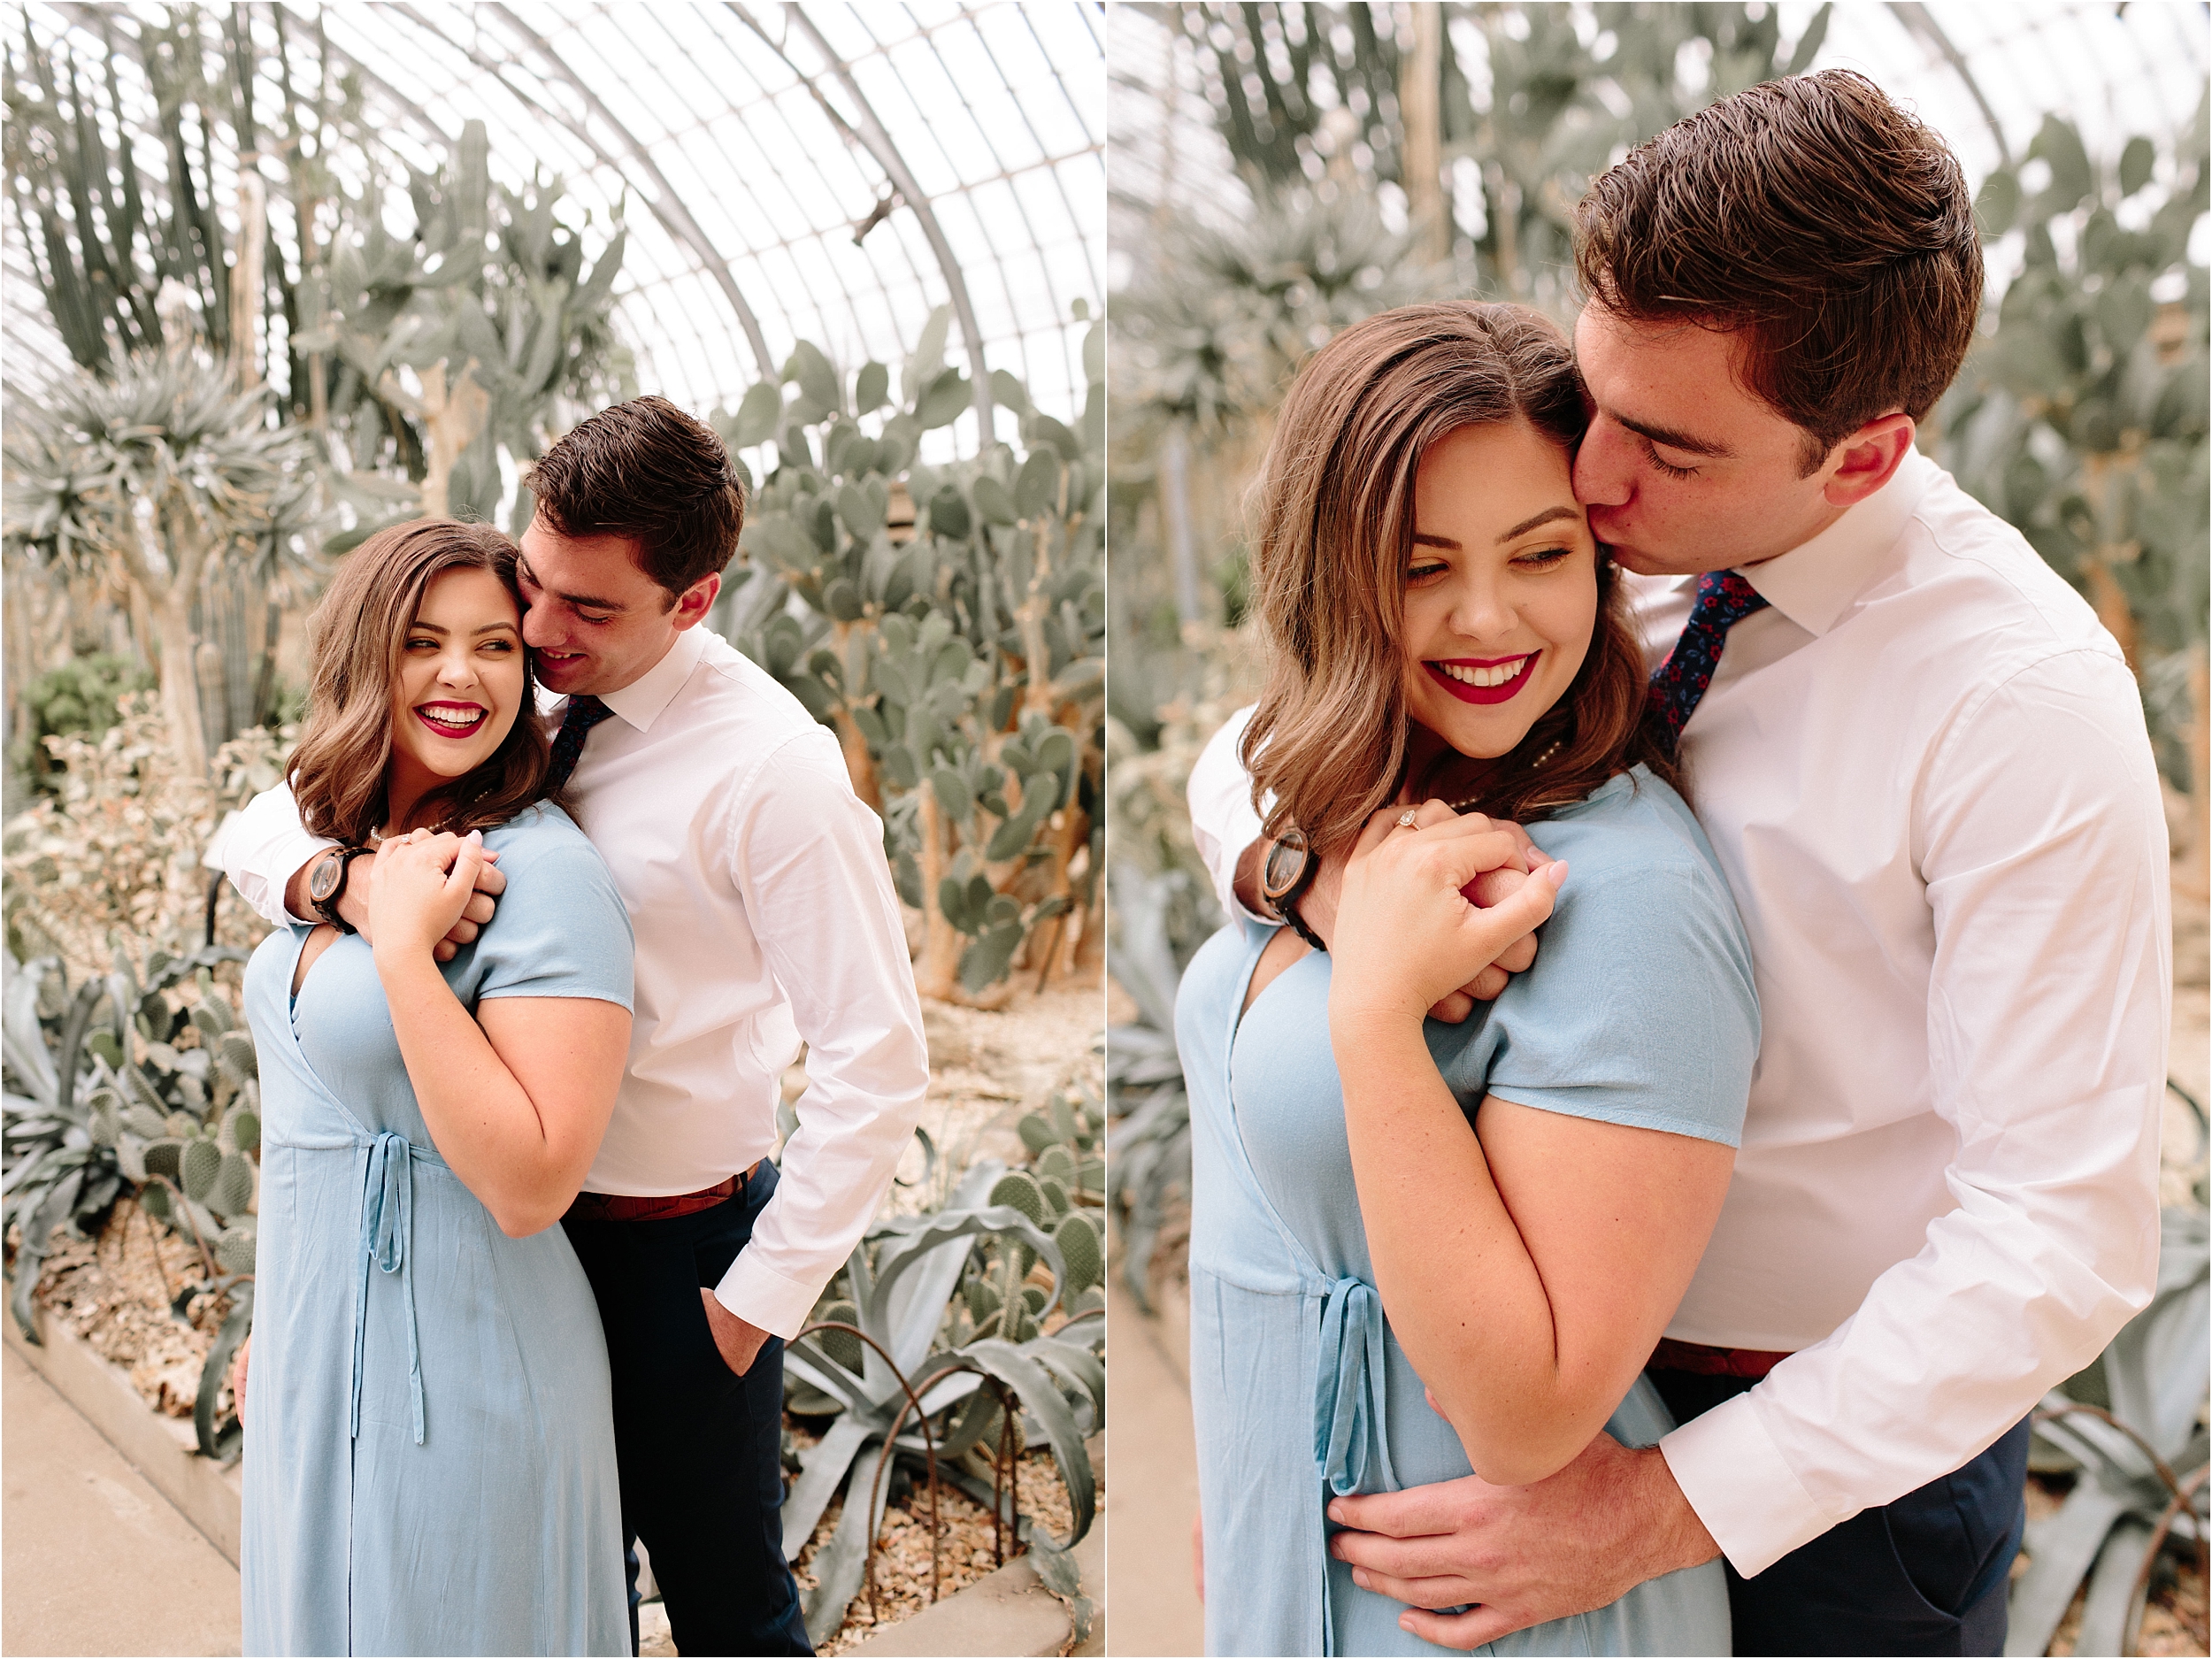 Garfield Park Conservatory Engagement Session